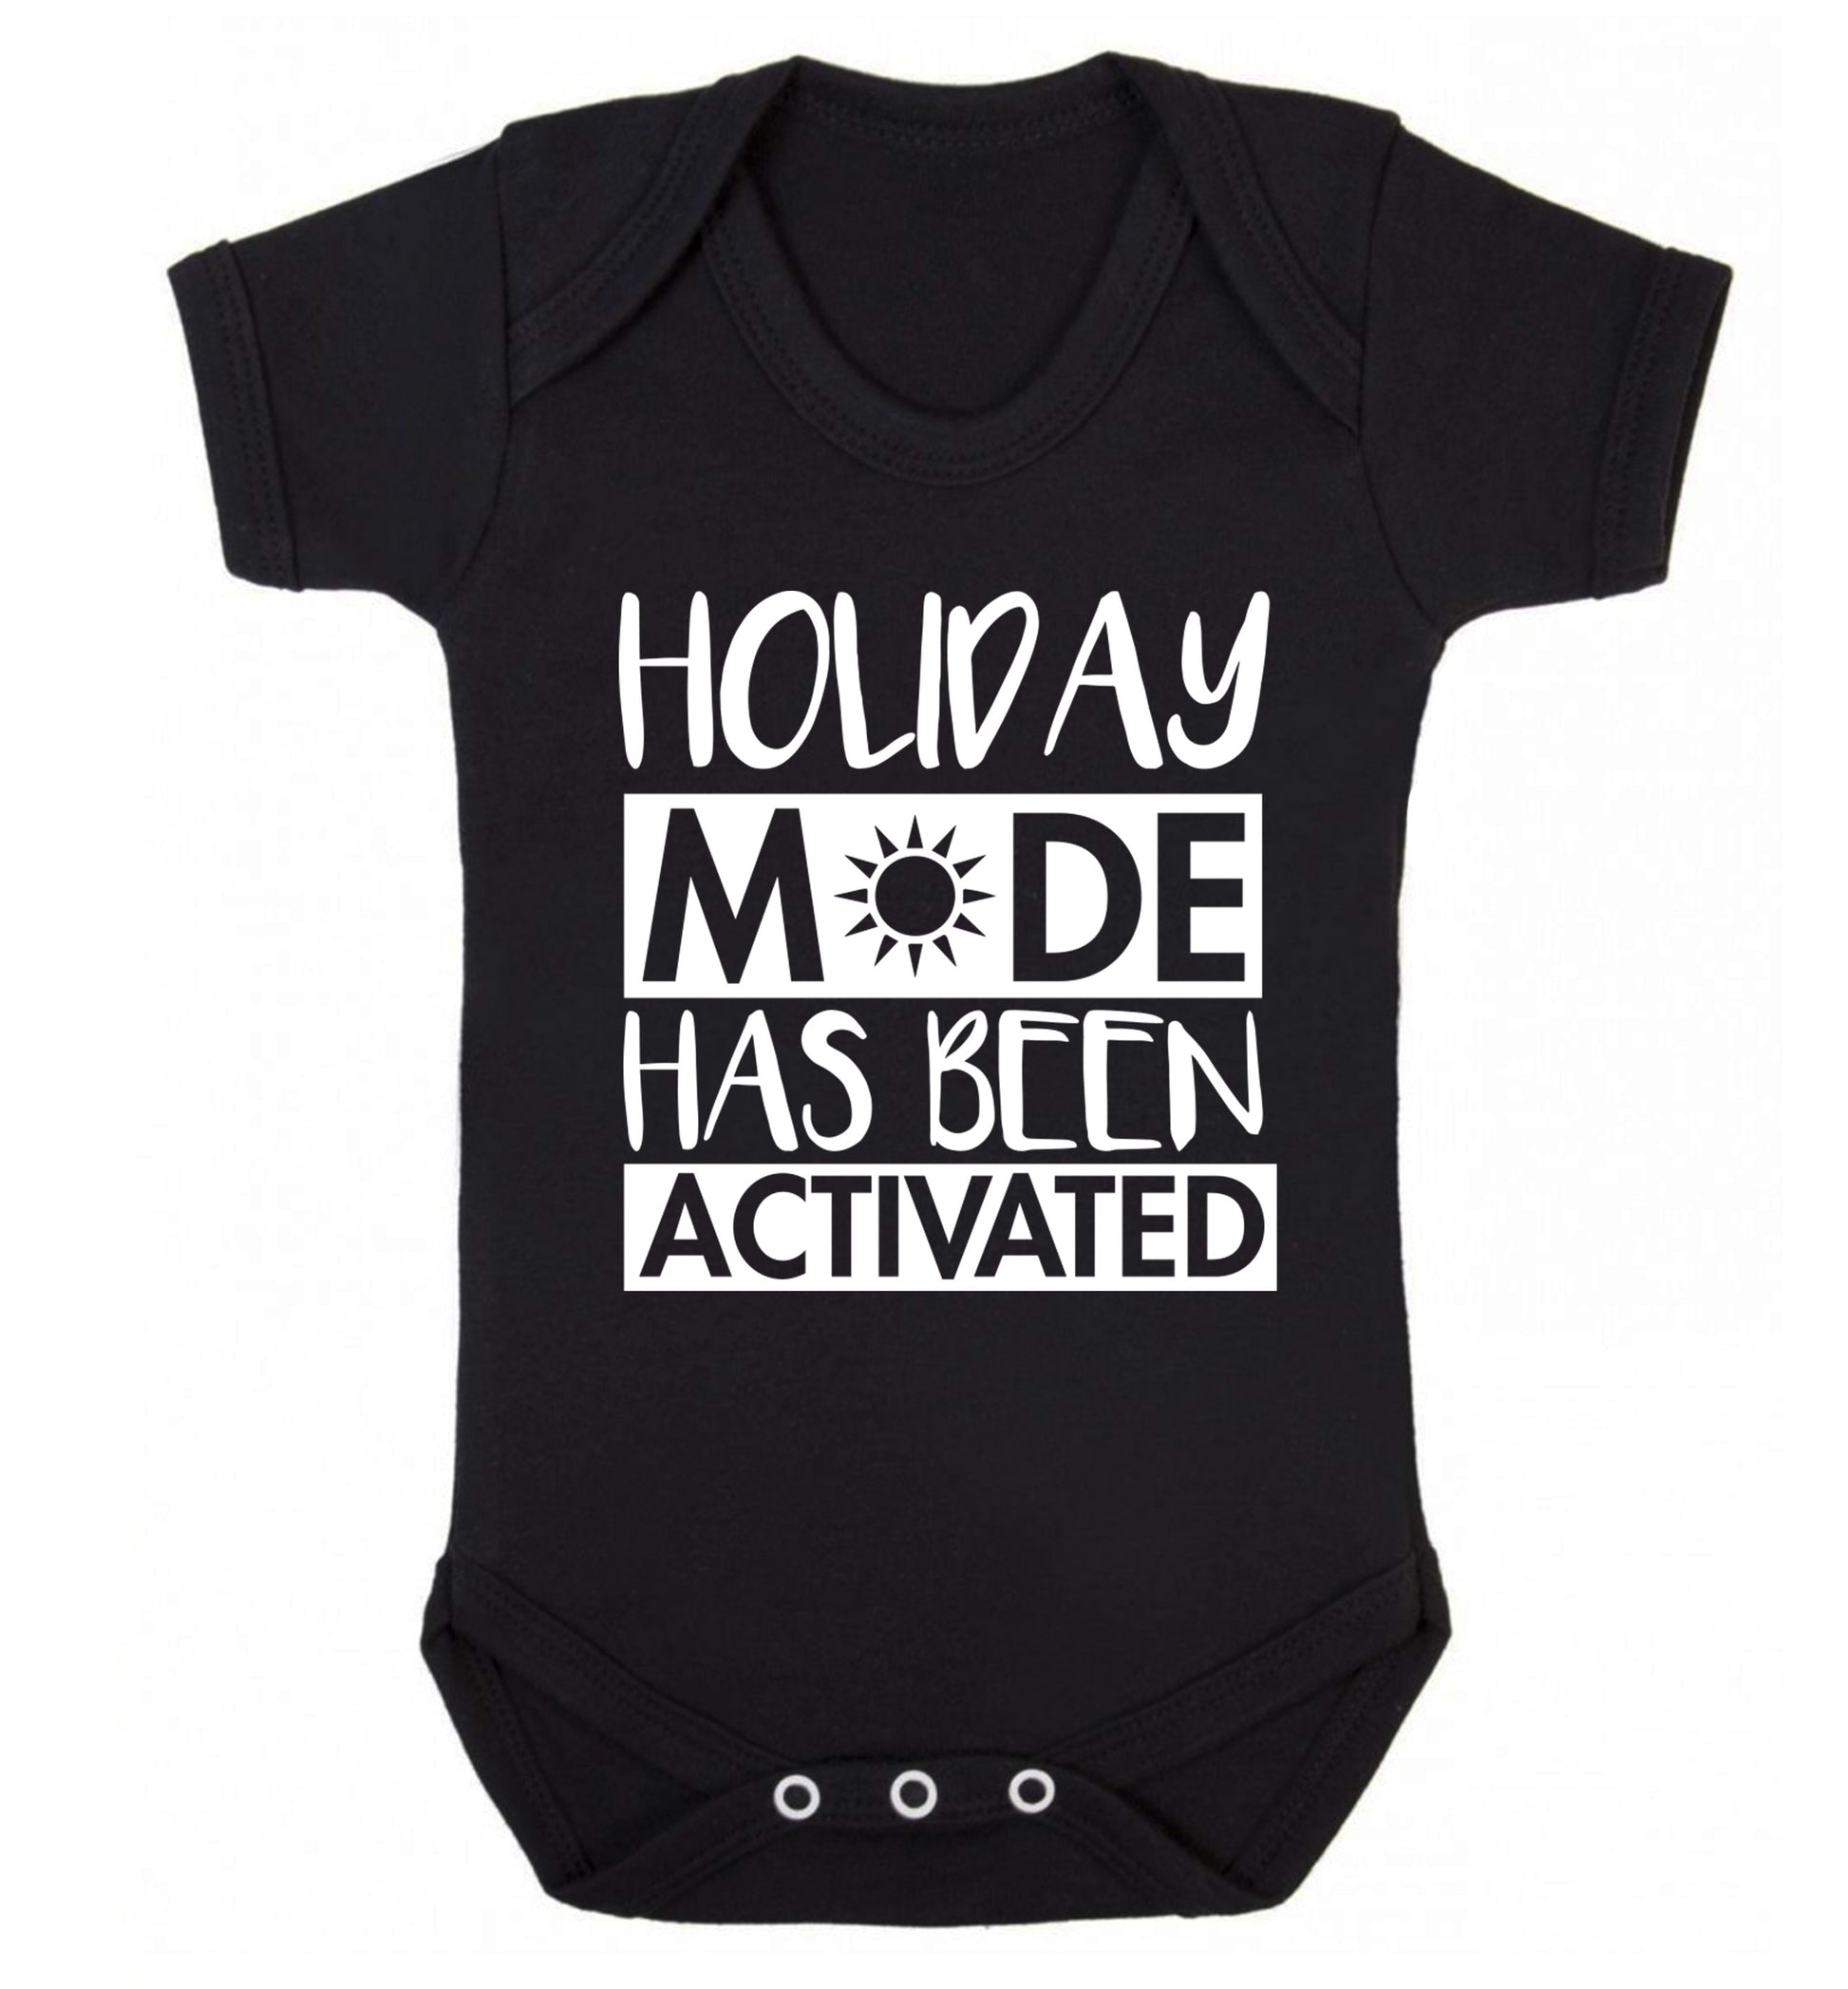 Holiday mode has been activated Baby Vest black 18-24 months